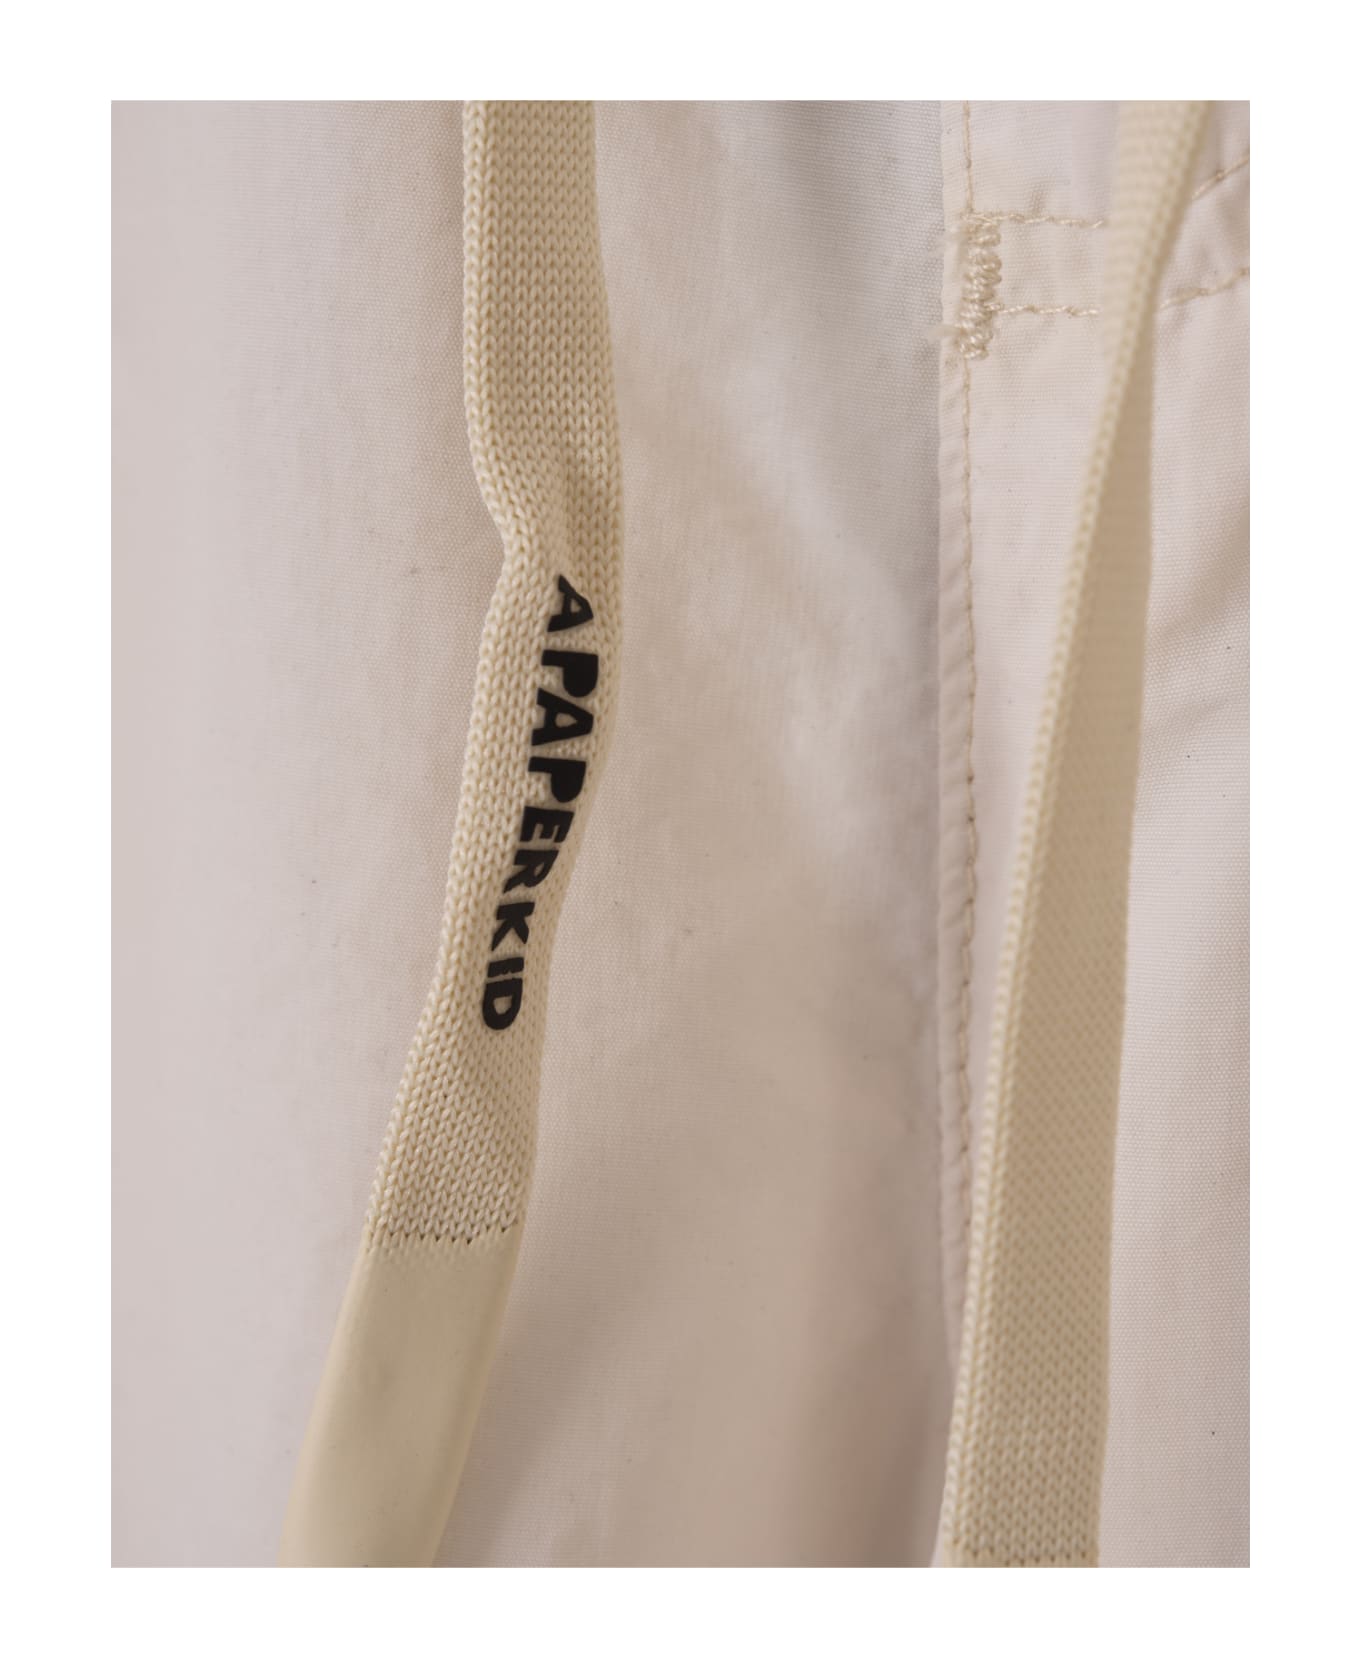 A Paper Kid White Cargo Trousers With Logo - White name:467